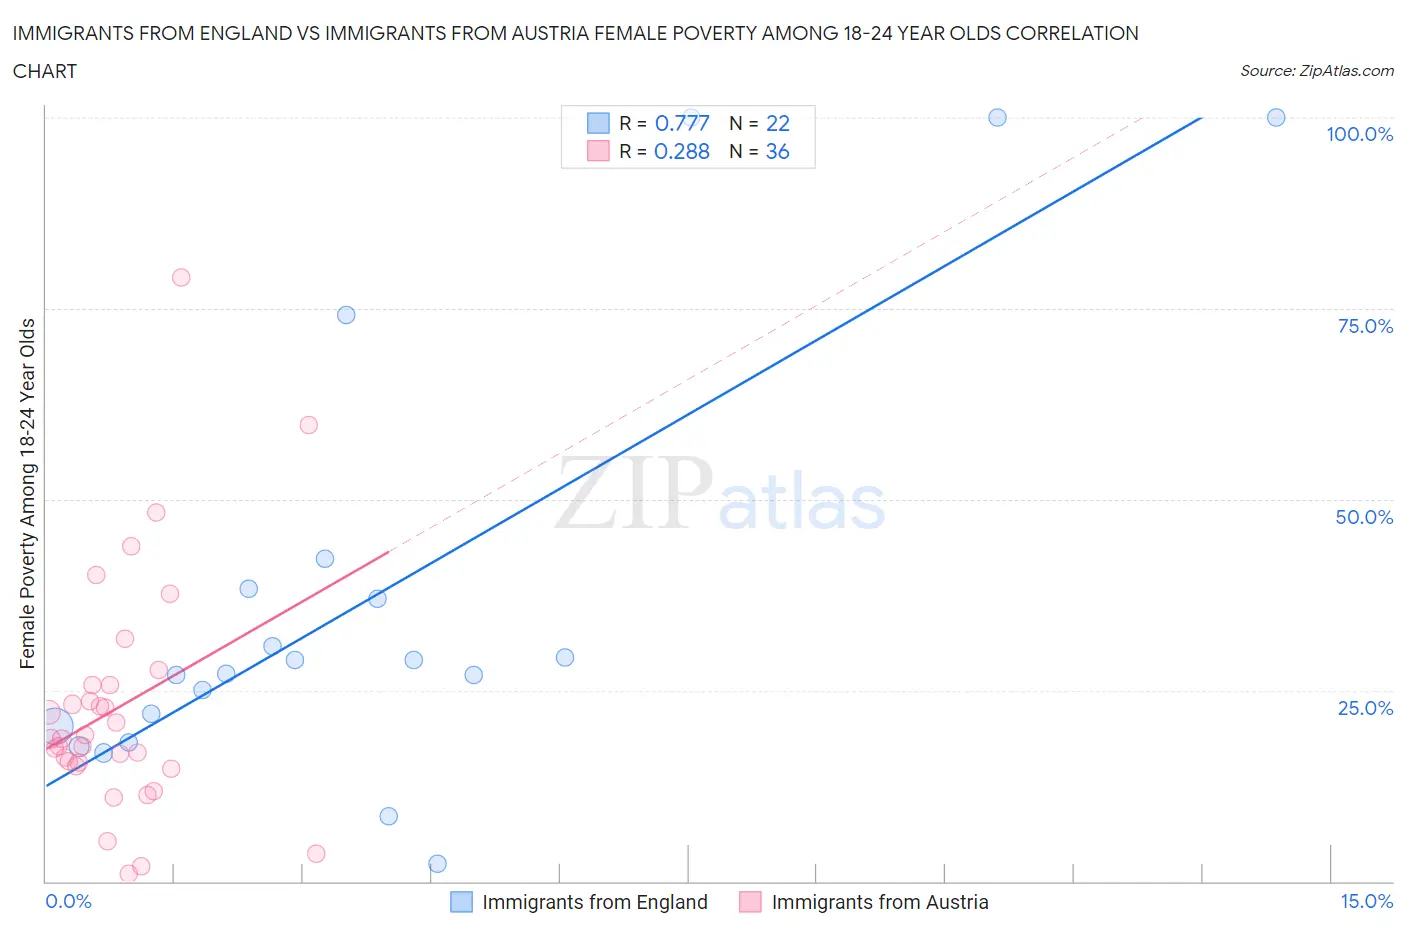 Immigrants from England vs Immigrants from Austria Female Poverty Among 18-24 Year Olds